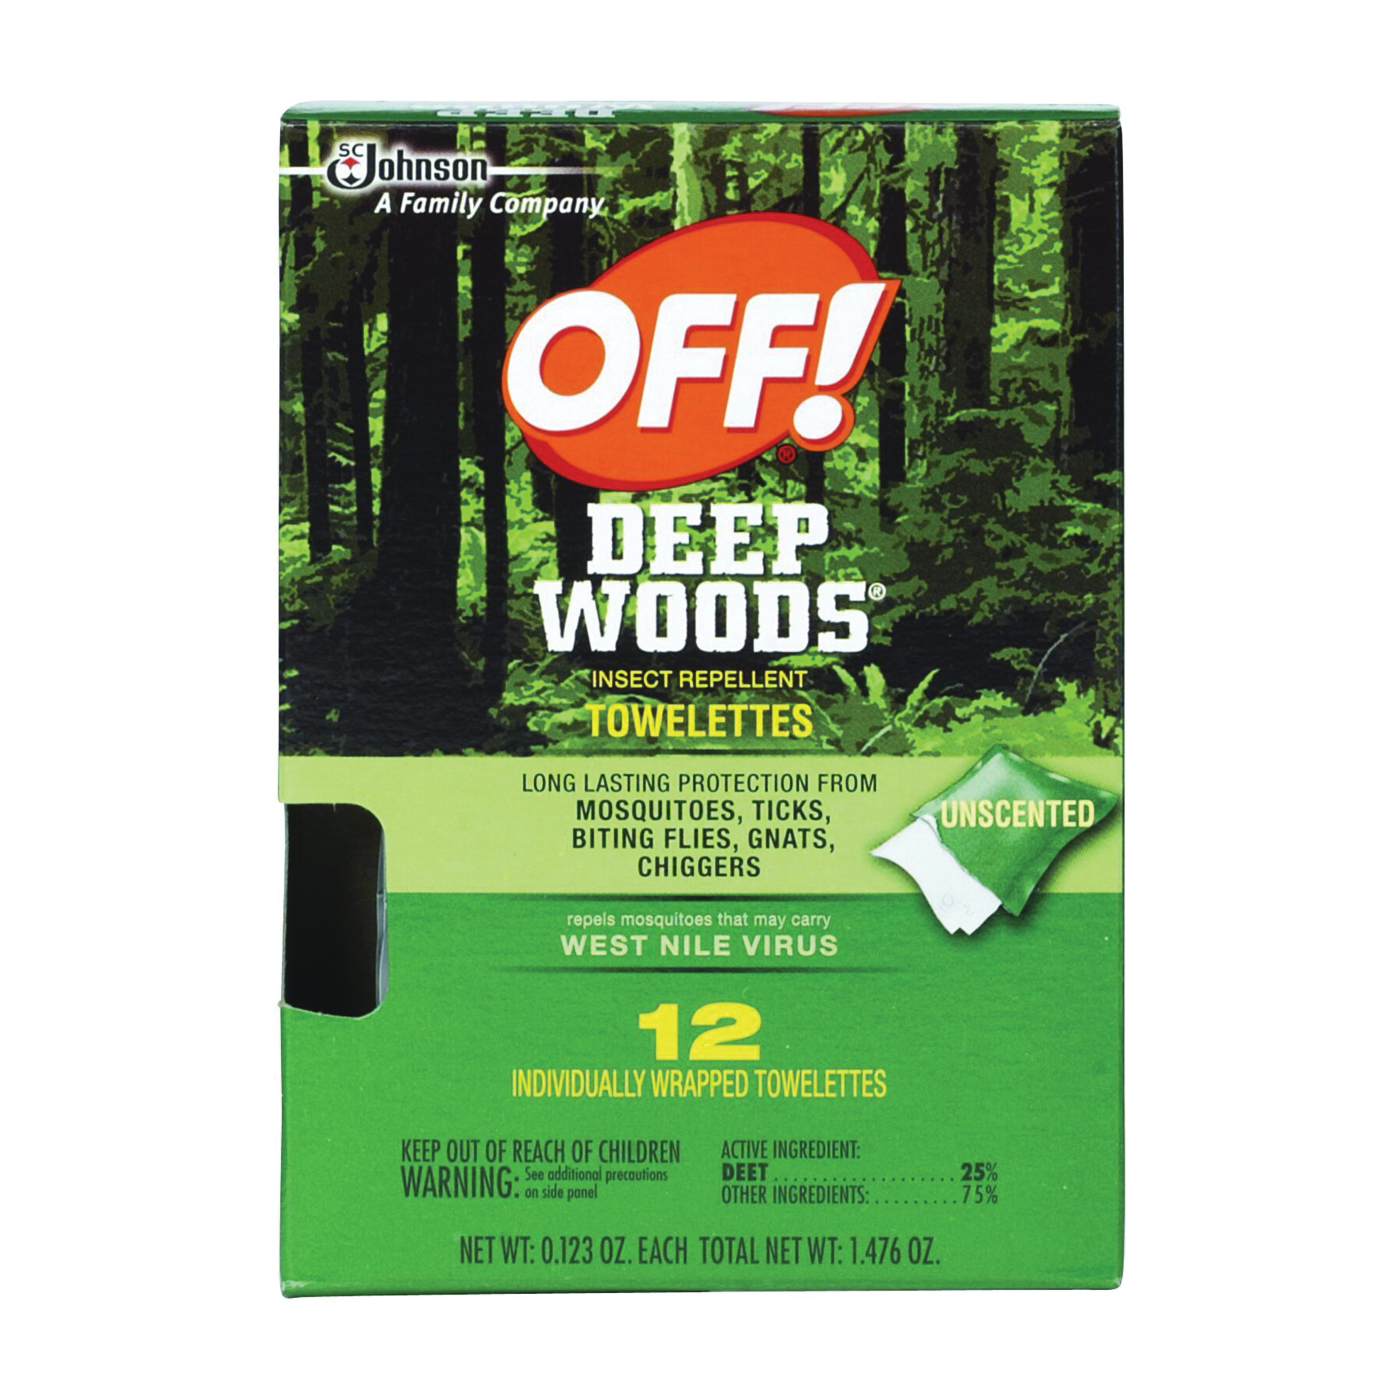 Deep Woods 54996 Insect Repellent Towelette, 12 CT Pack, Liquid, Clear/White, Alcohol